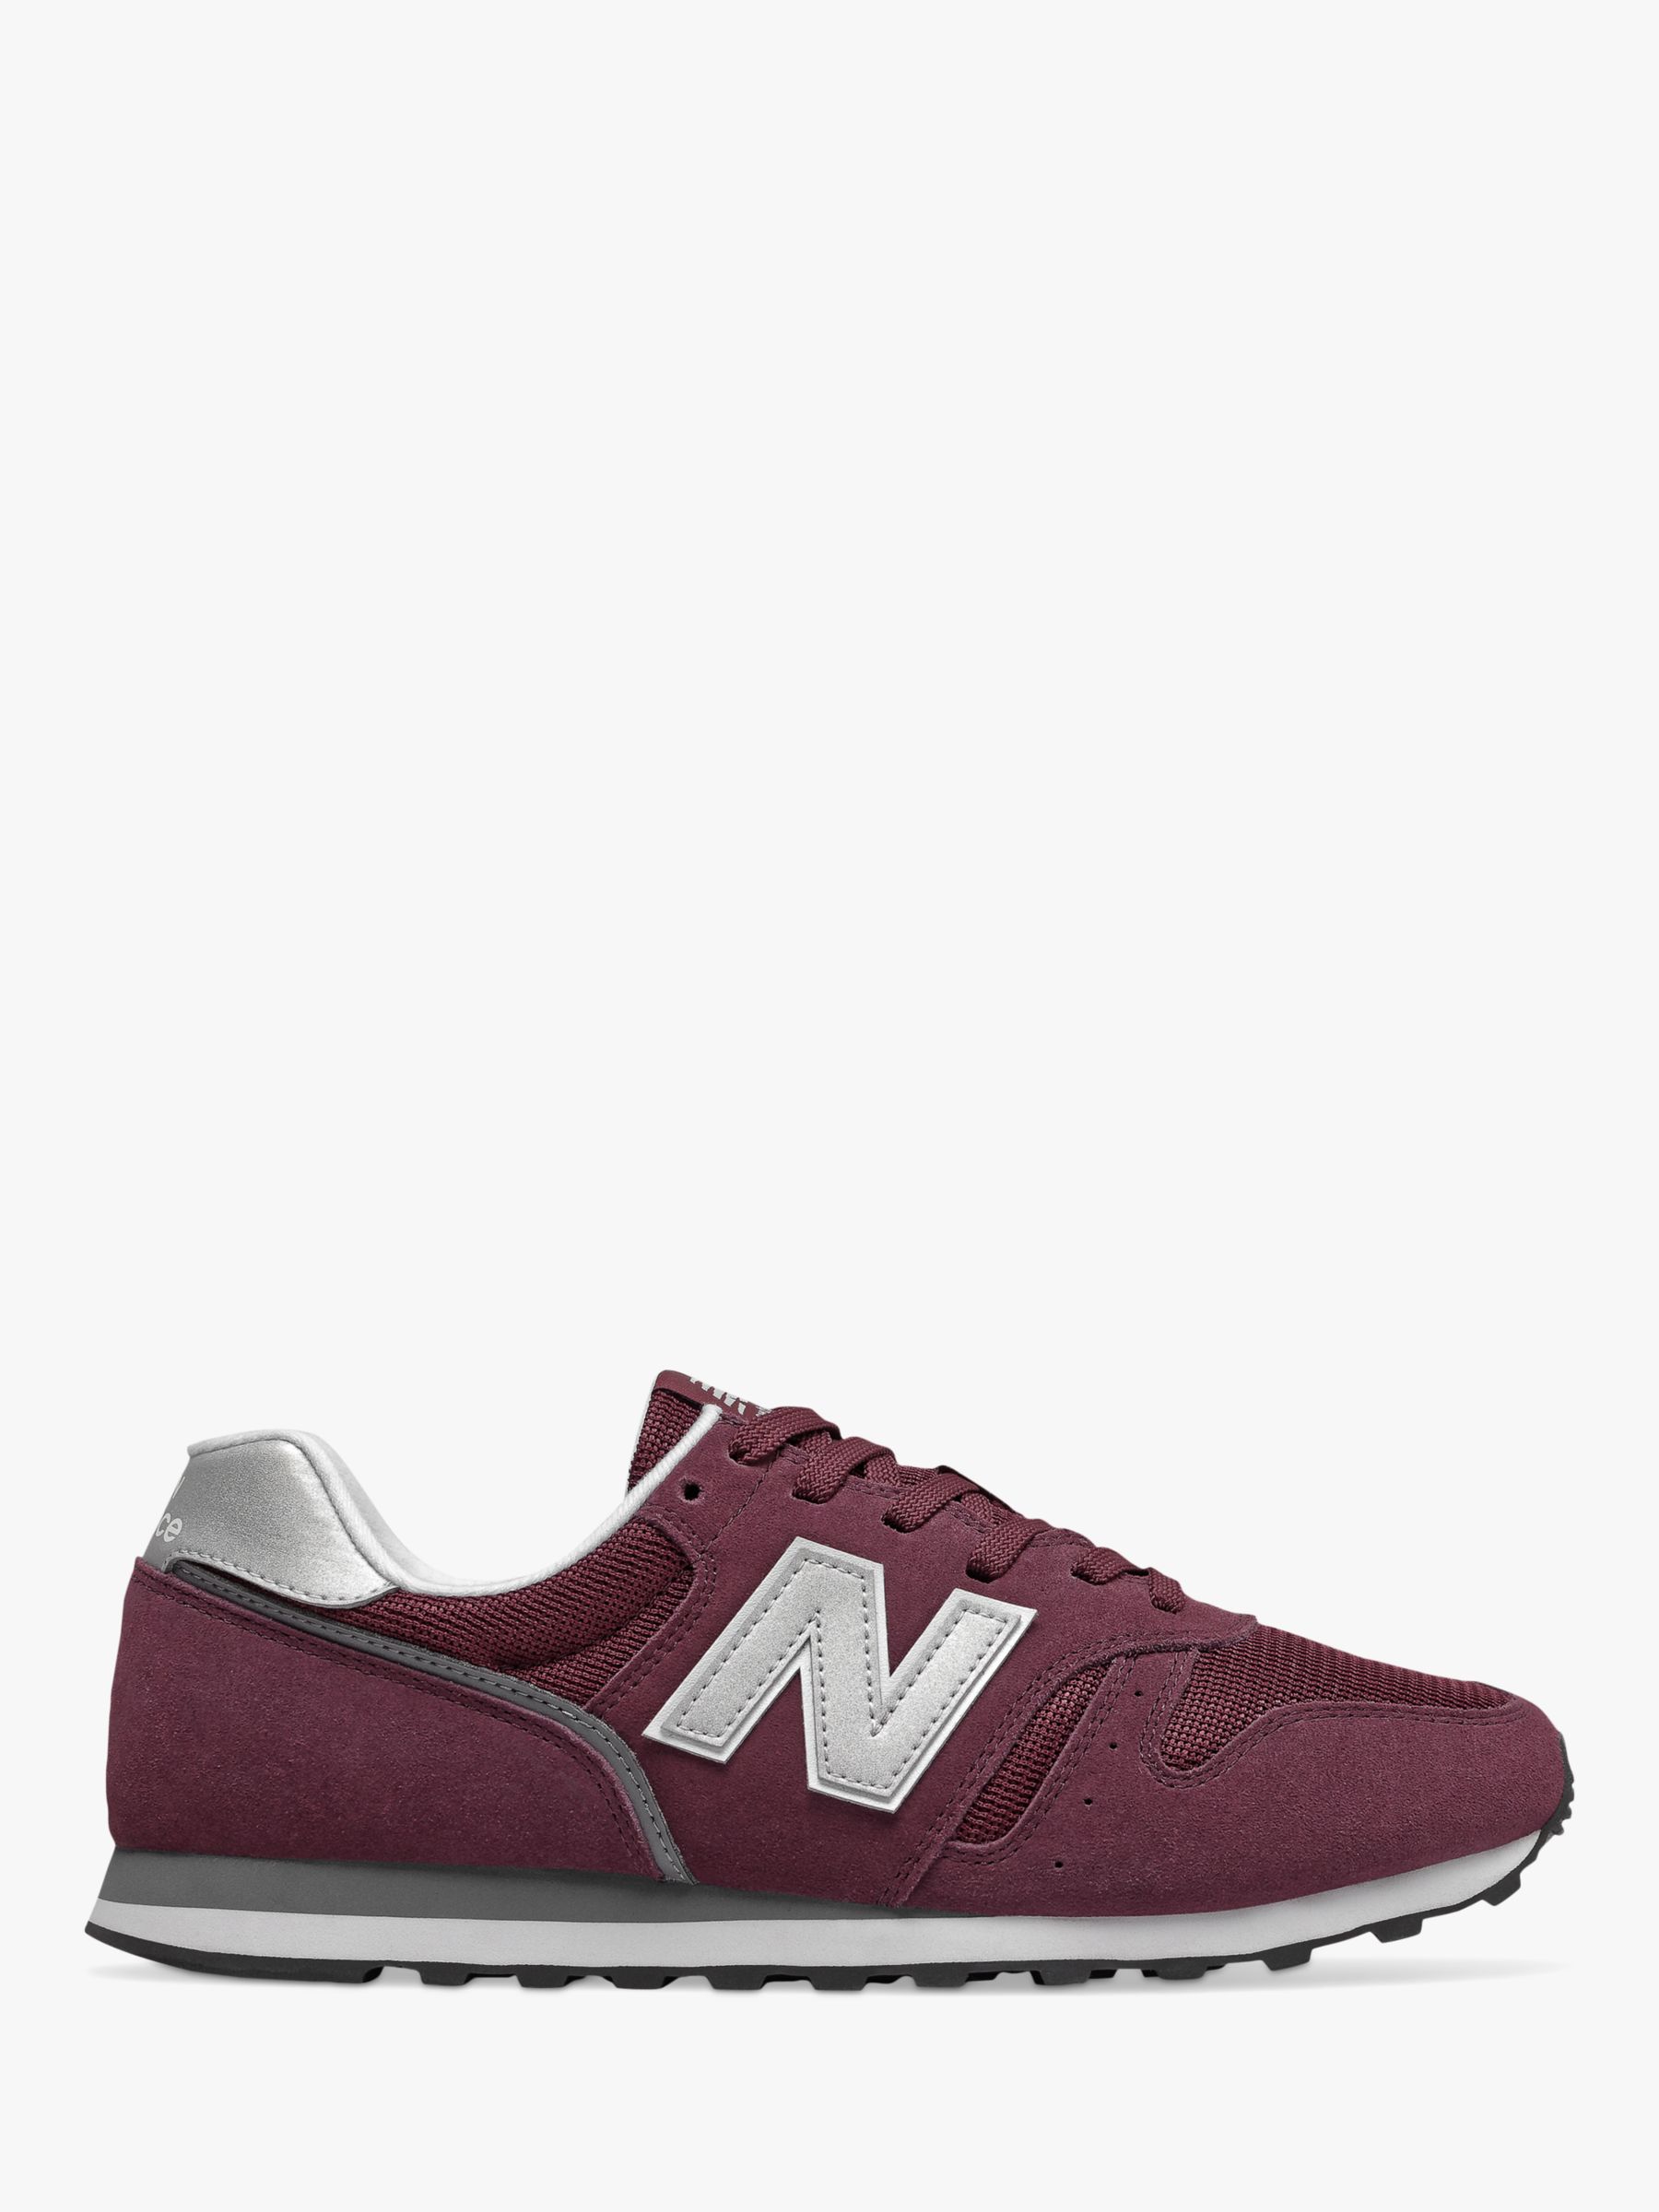 new balance burgundy 373 suede & mesh trainers